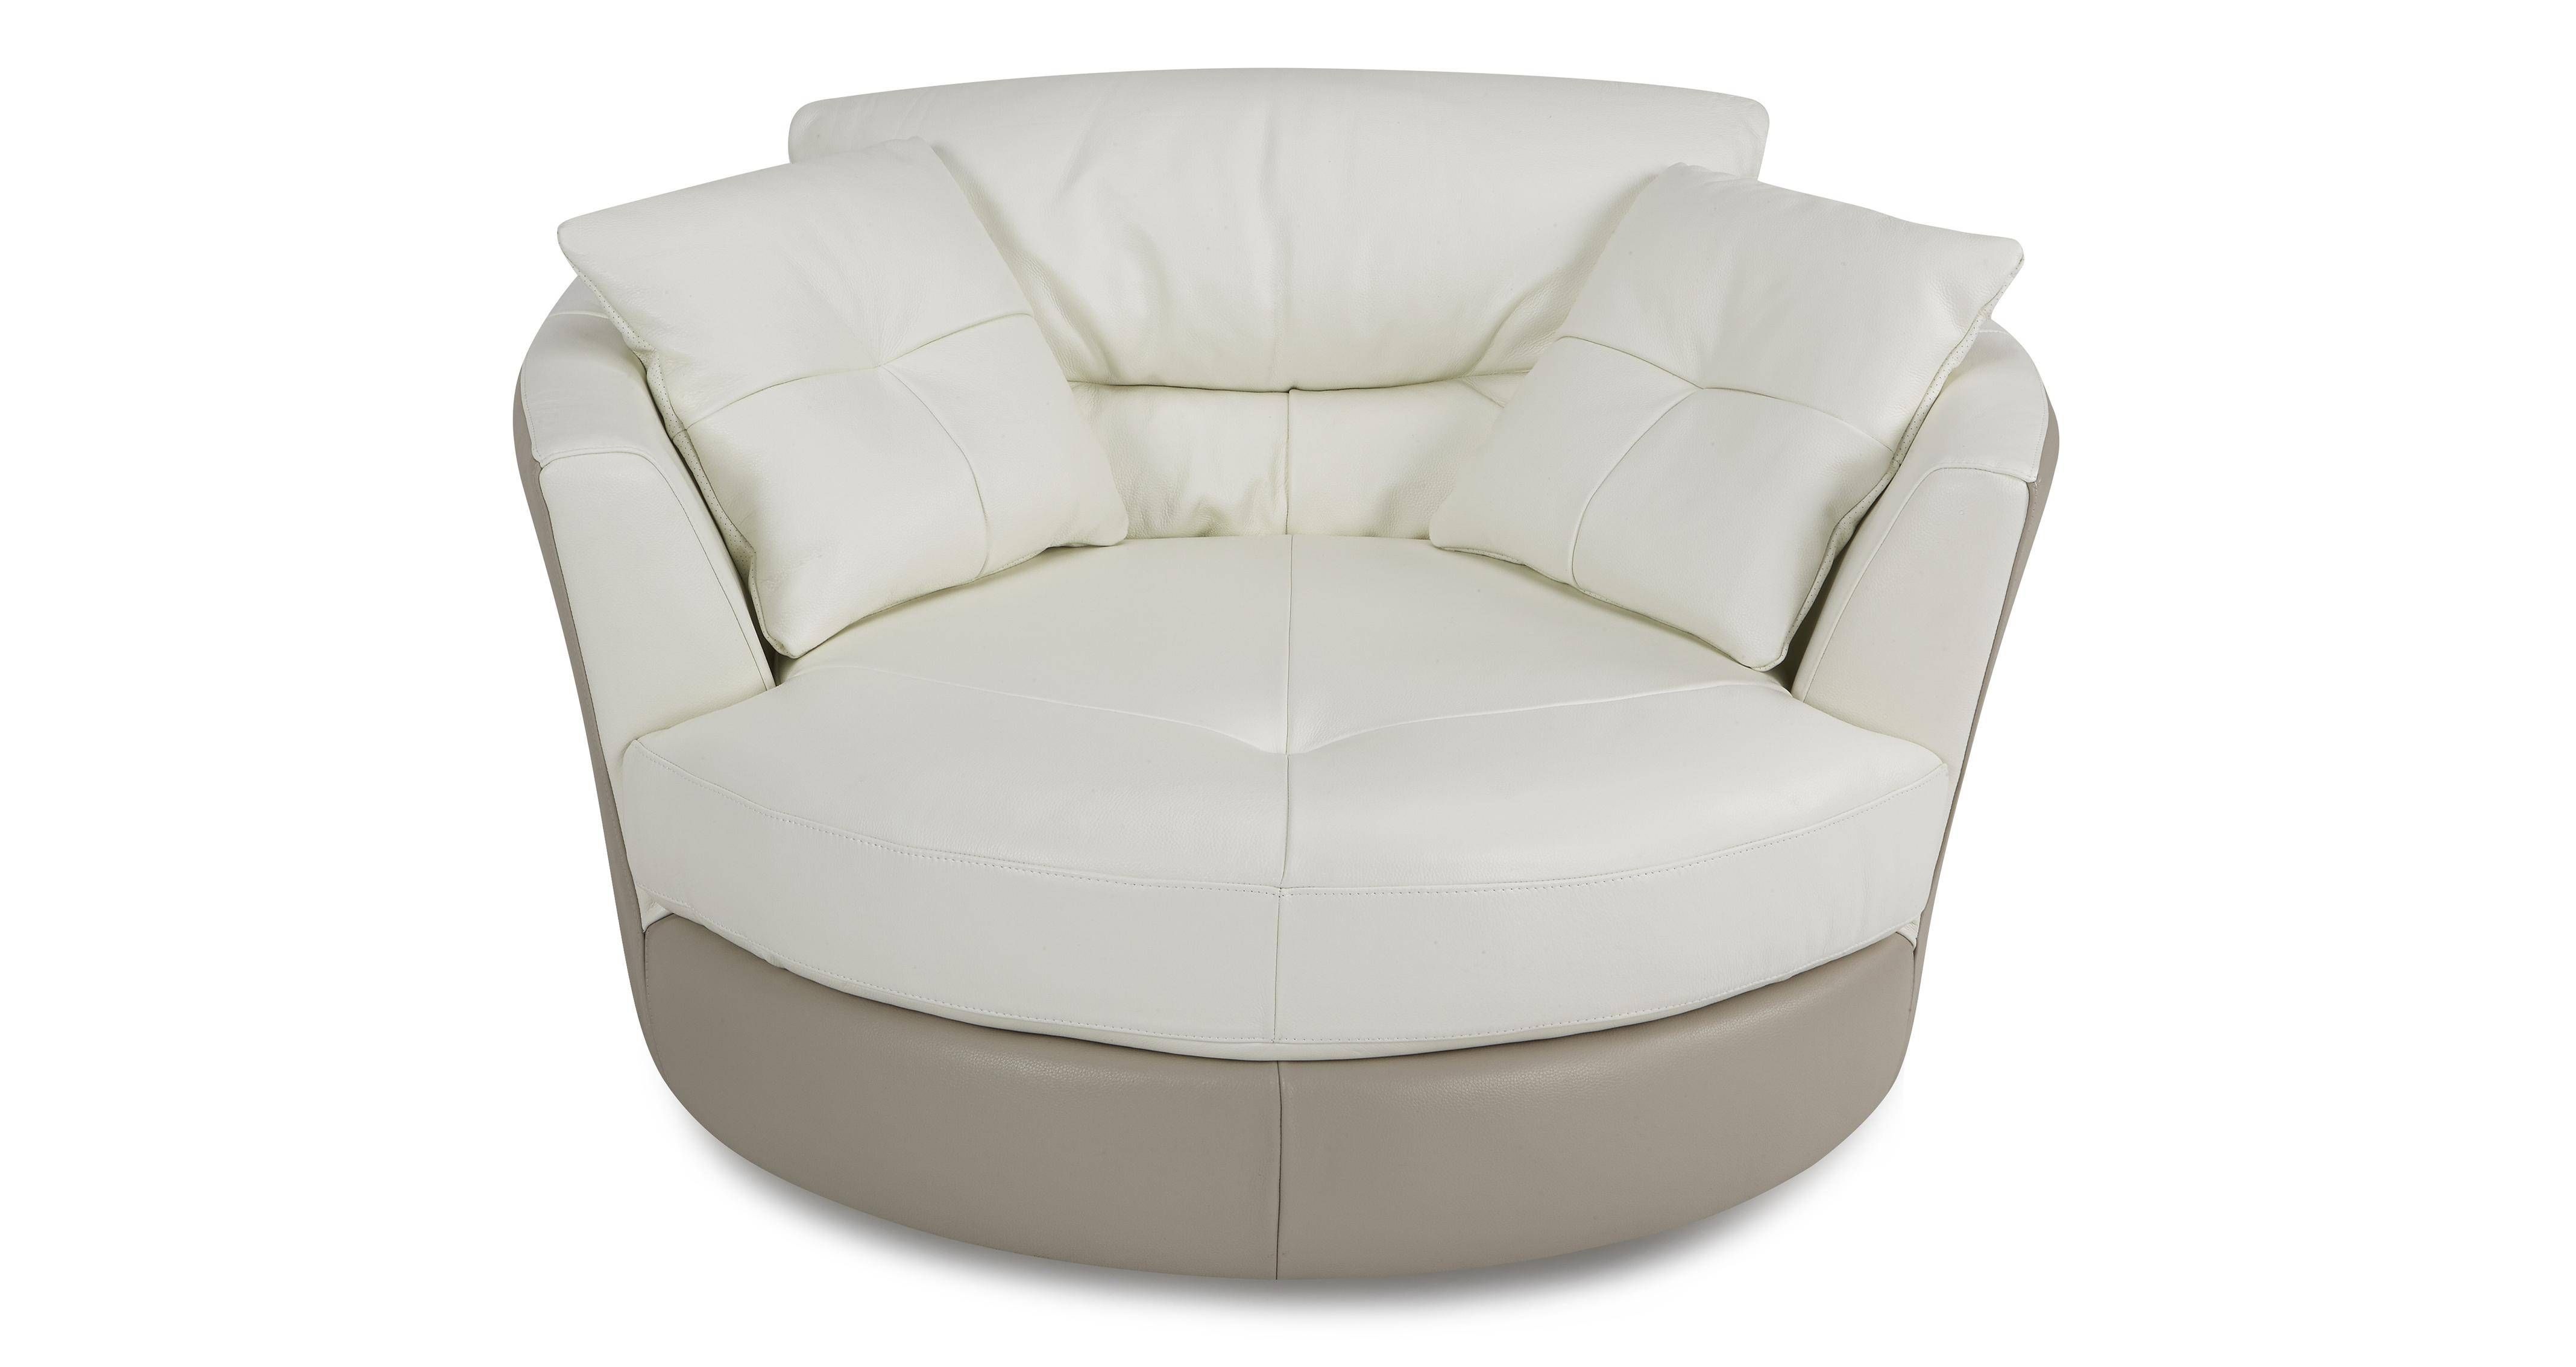 Sofas Center : Swivel Sofa Chair Round And Setround Chairsofa Set Regarding Round Swivel Sofa Chairs (View 11 of 30)